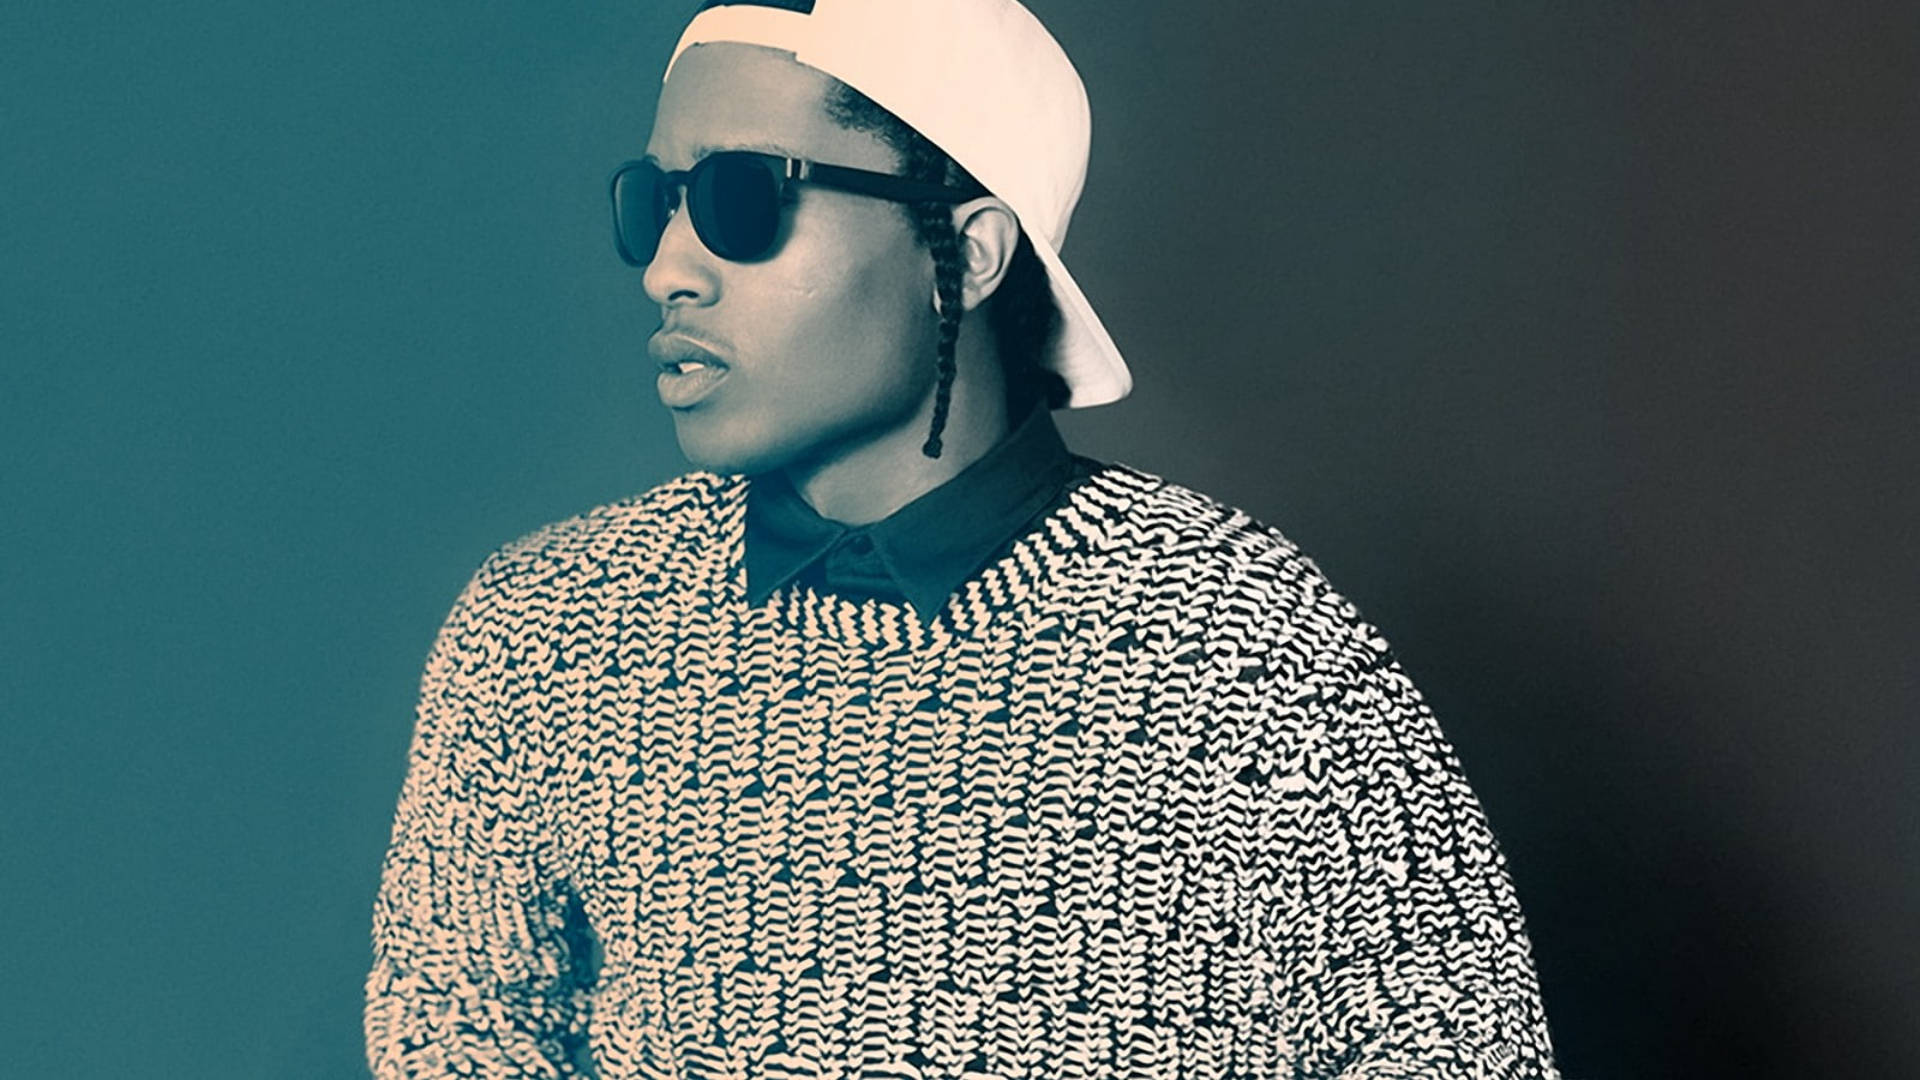 Asap Rocky With White Cap Background